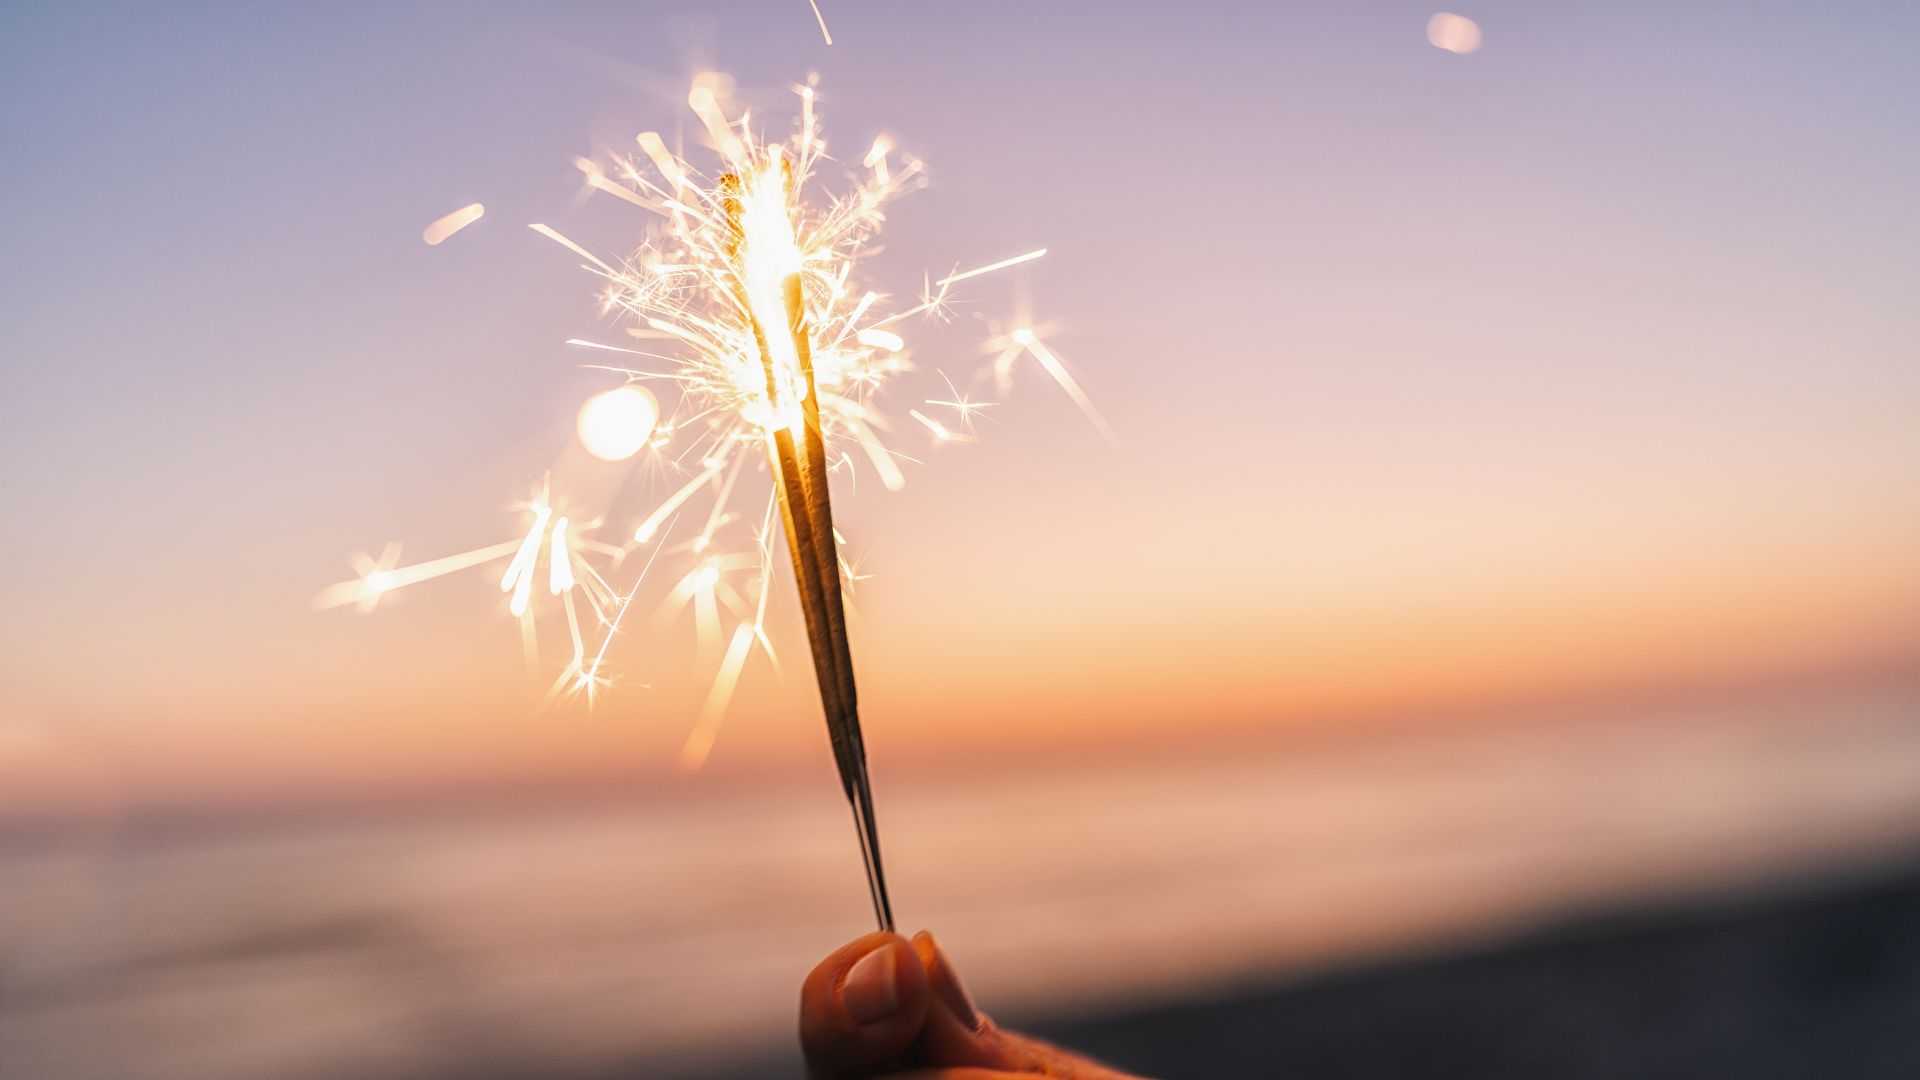 DOH records 5 amputation cases from fireworks